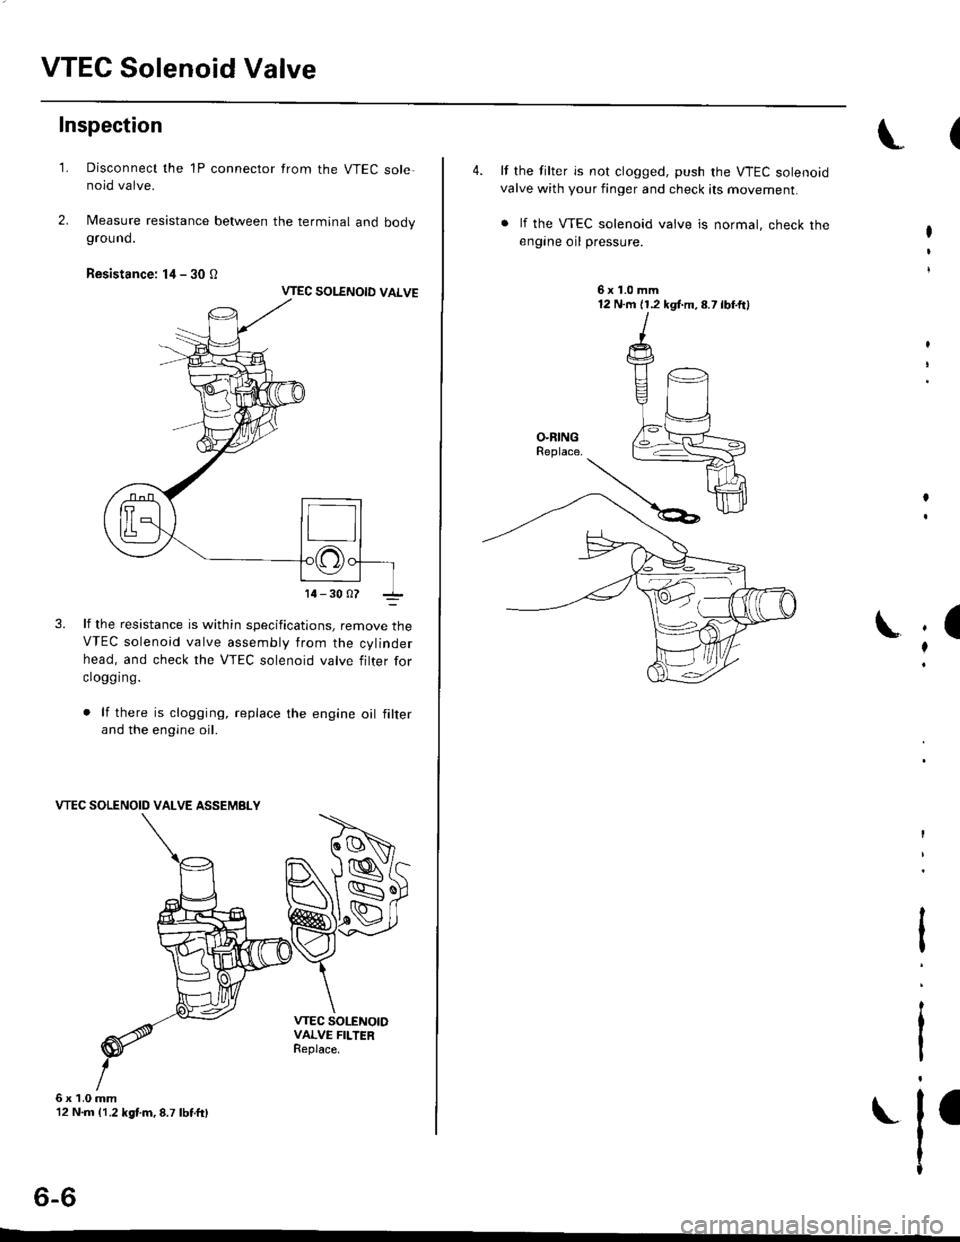 HONDA CIVIC 1997 6.G Repair Manual VTEC Solenoid Valve
Inspection
1.
6x1.0mm12 N.m 11.2 kgf.m,8.7 lbtft)
Disconnect the 1P connector from the VTEC sole-noid valve.
Measure resistance between the terminal and bodyground.
Resistance: l4 